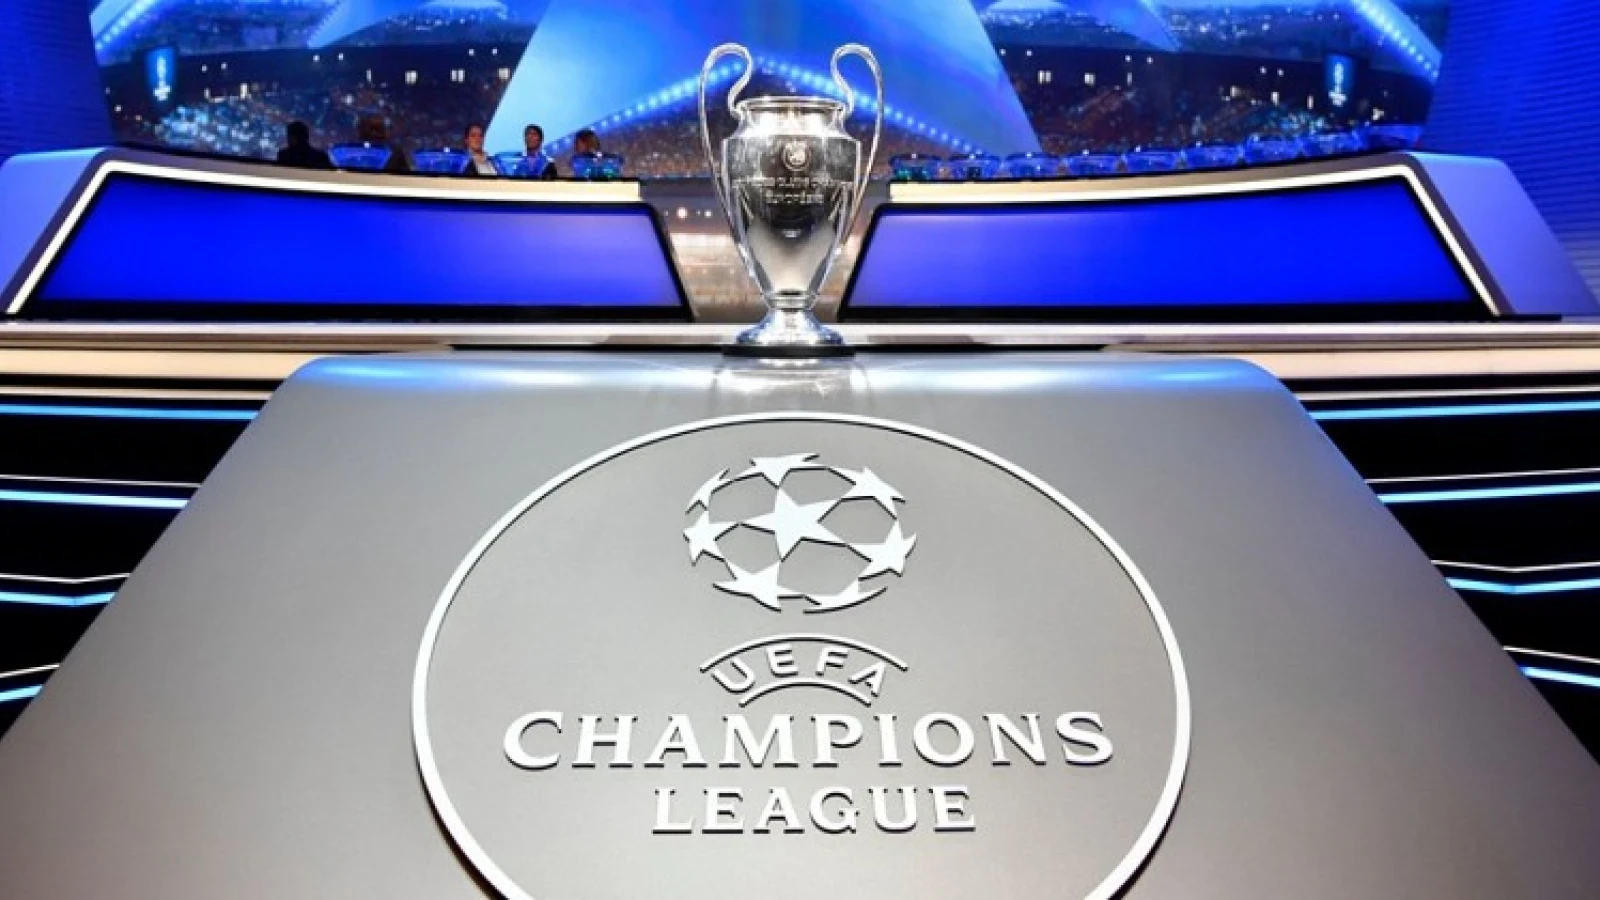 LIVE | Loting Champions League | Einde loting